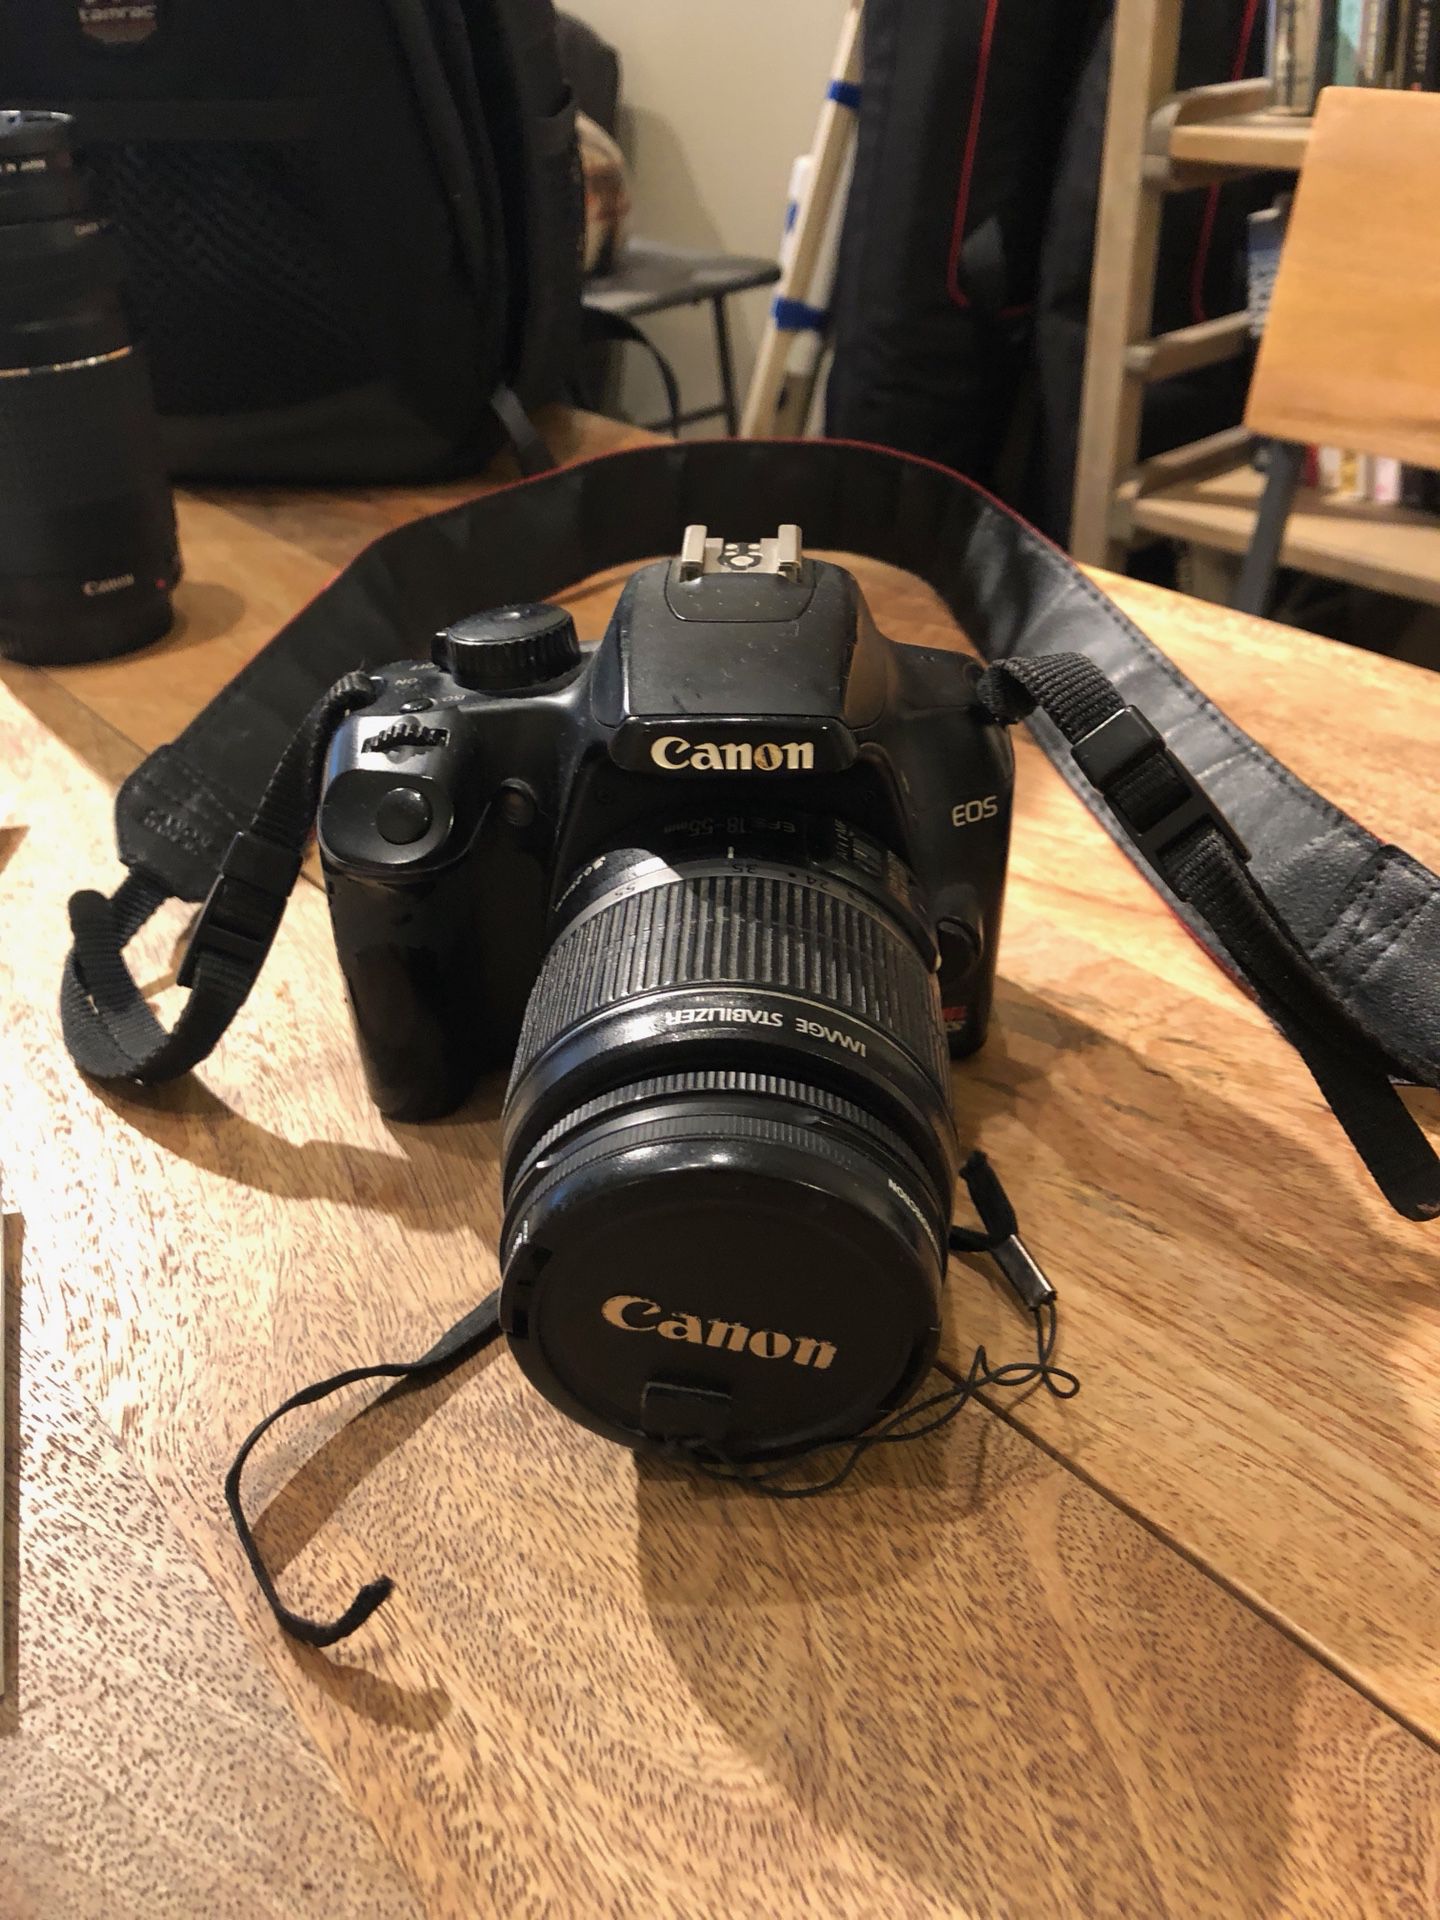 Canon XS Rebel, 55 mm lens and bag